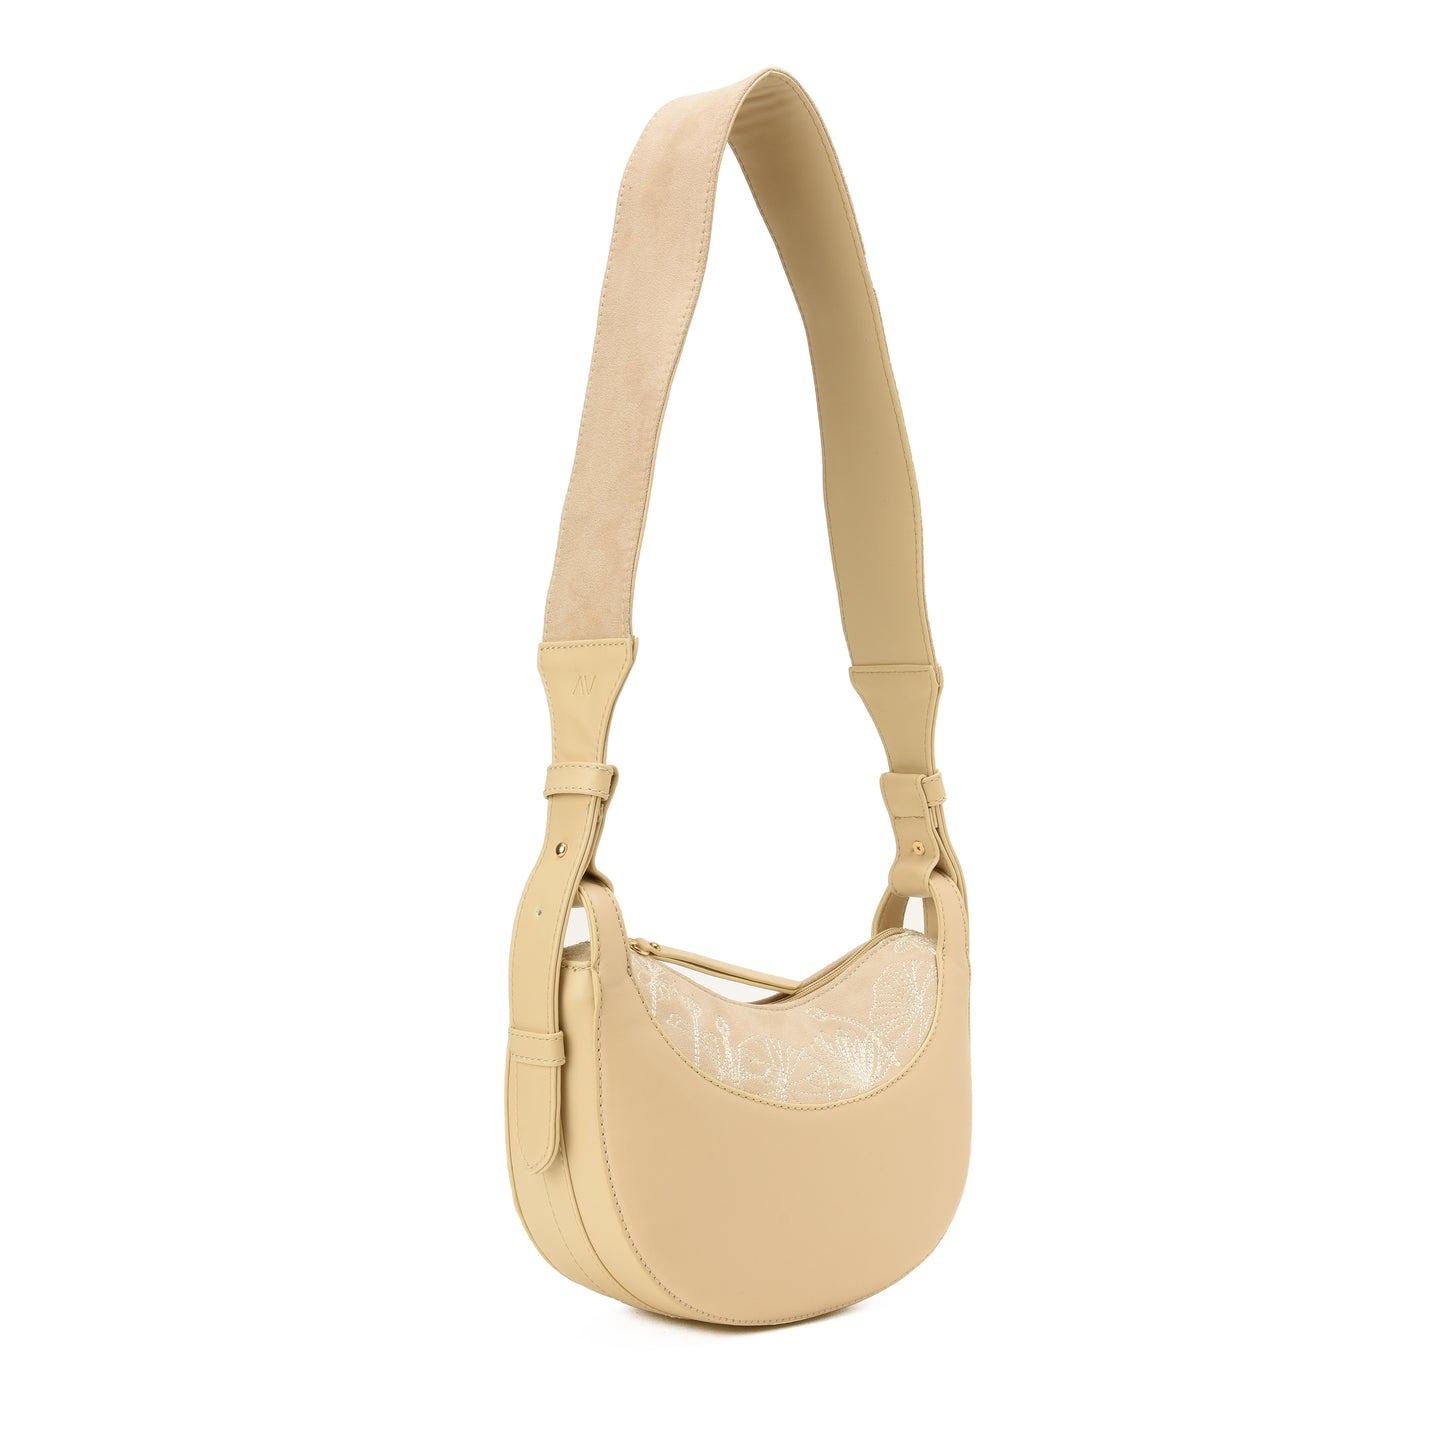 Handbag Beige with embroidery